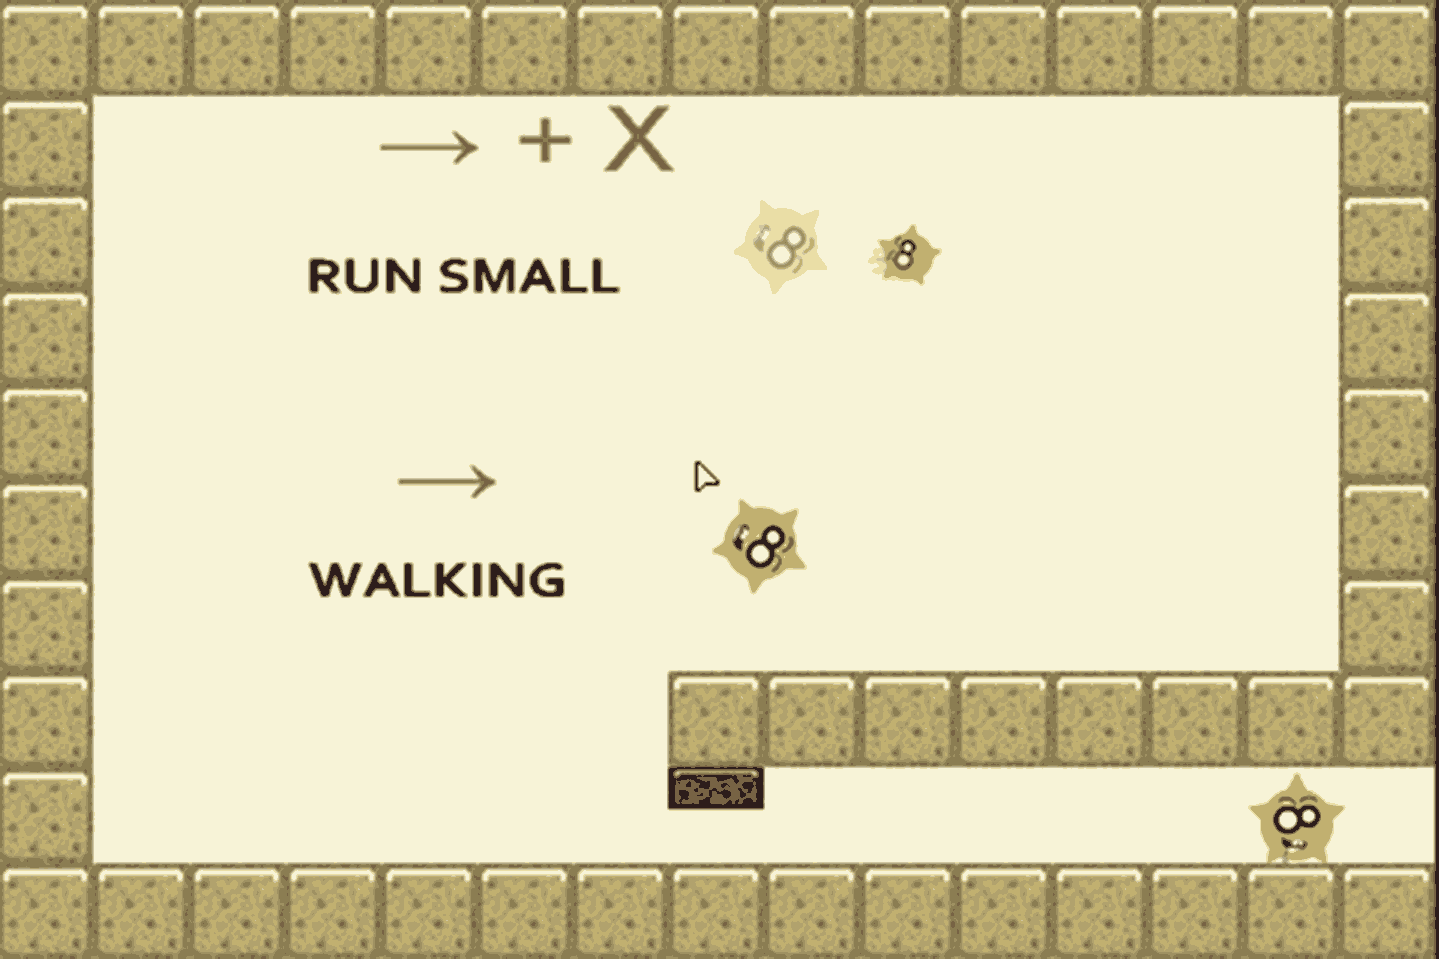 running and small > + x